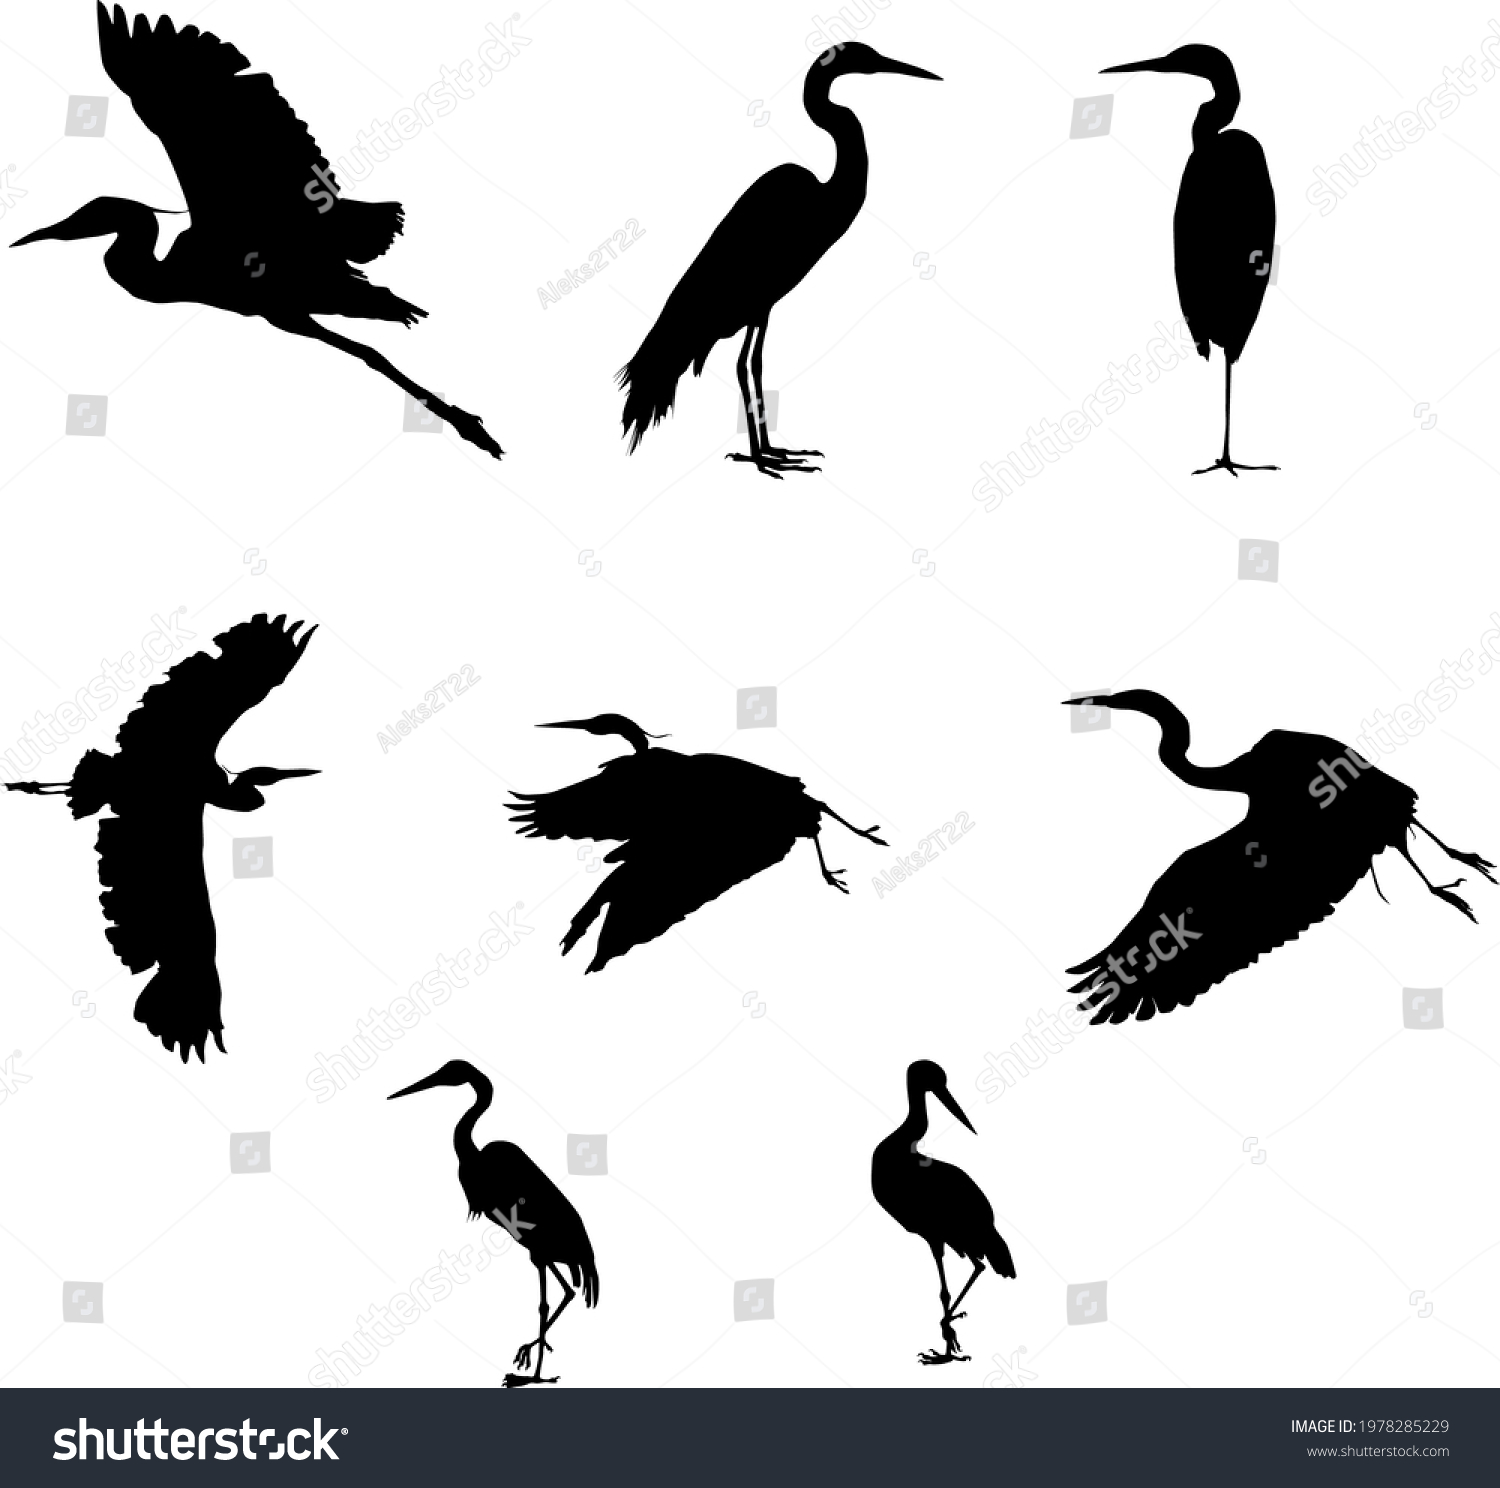 1,854 Chinese egret Images, Stock Photos & Vectors | Shutterstock